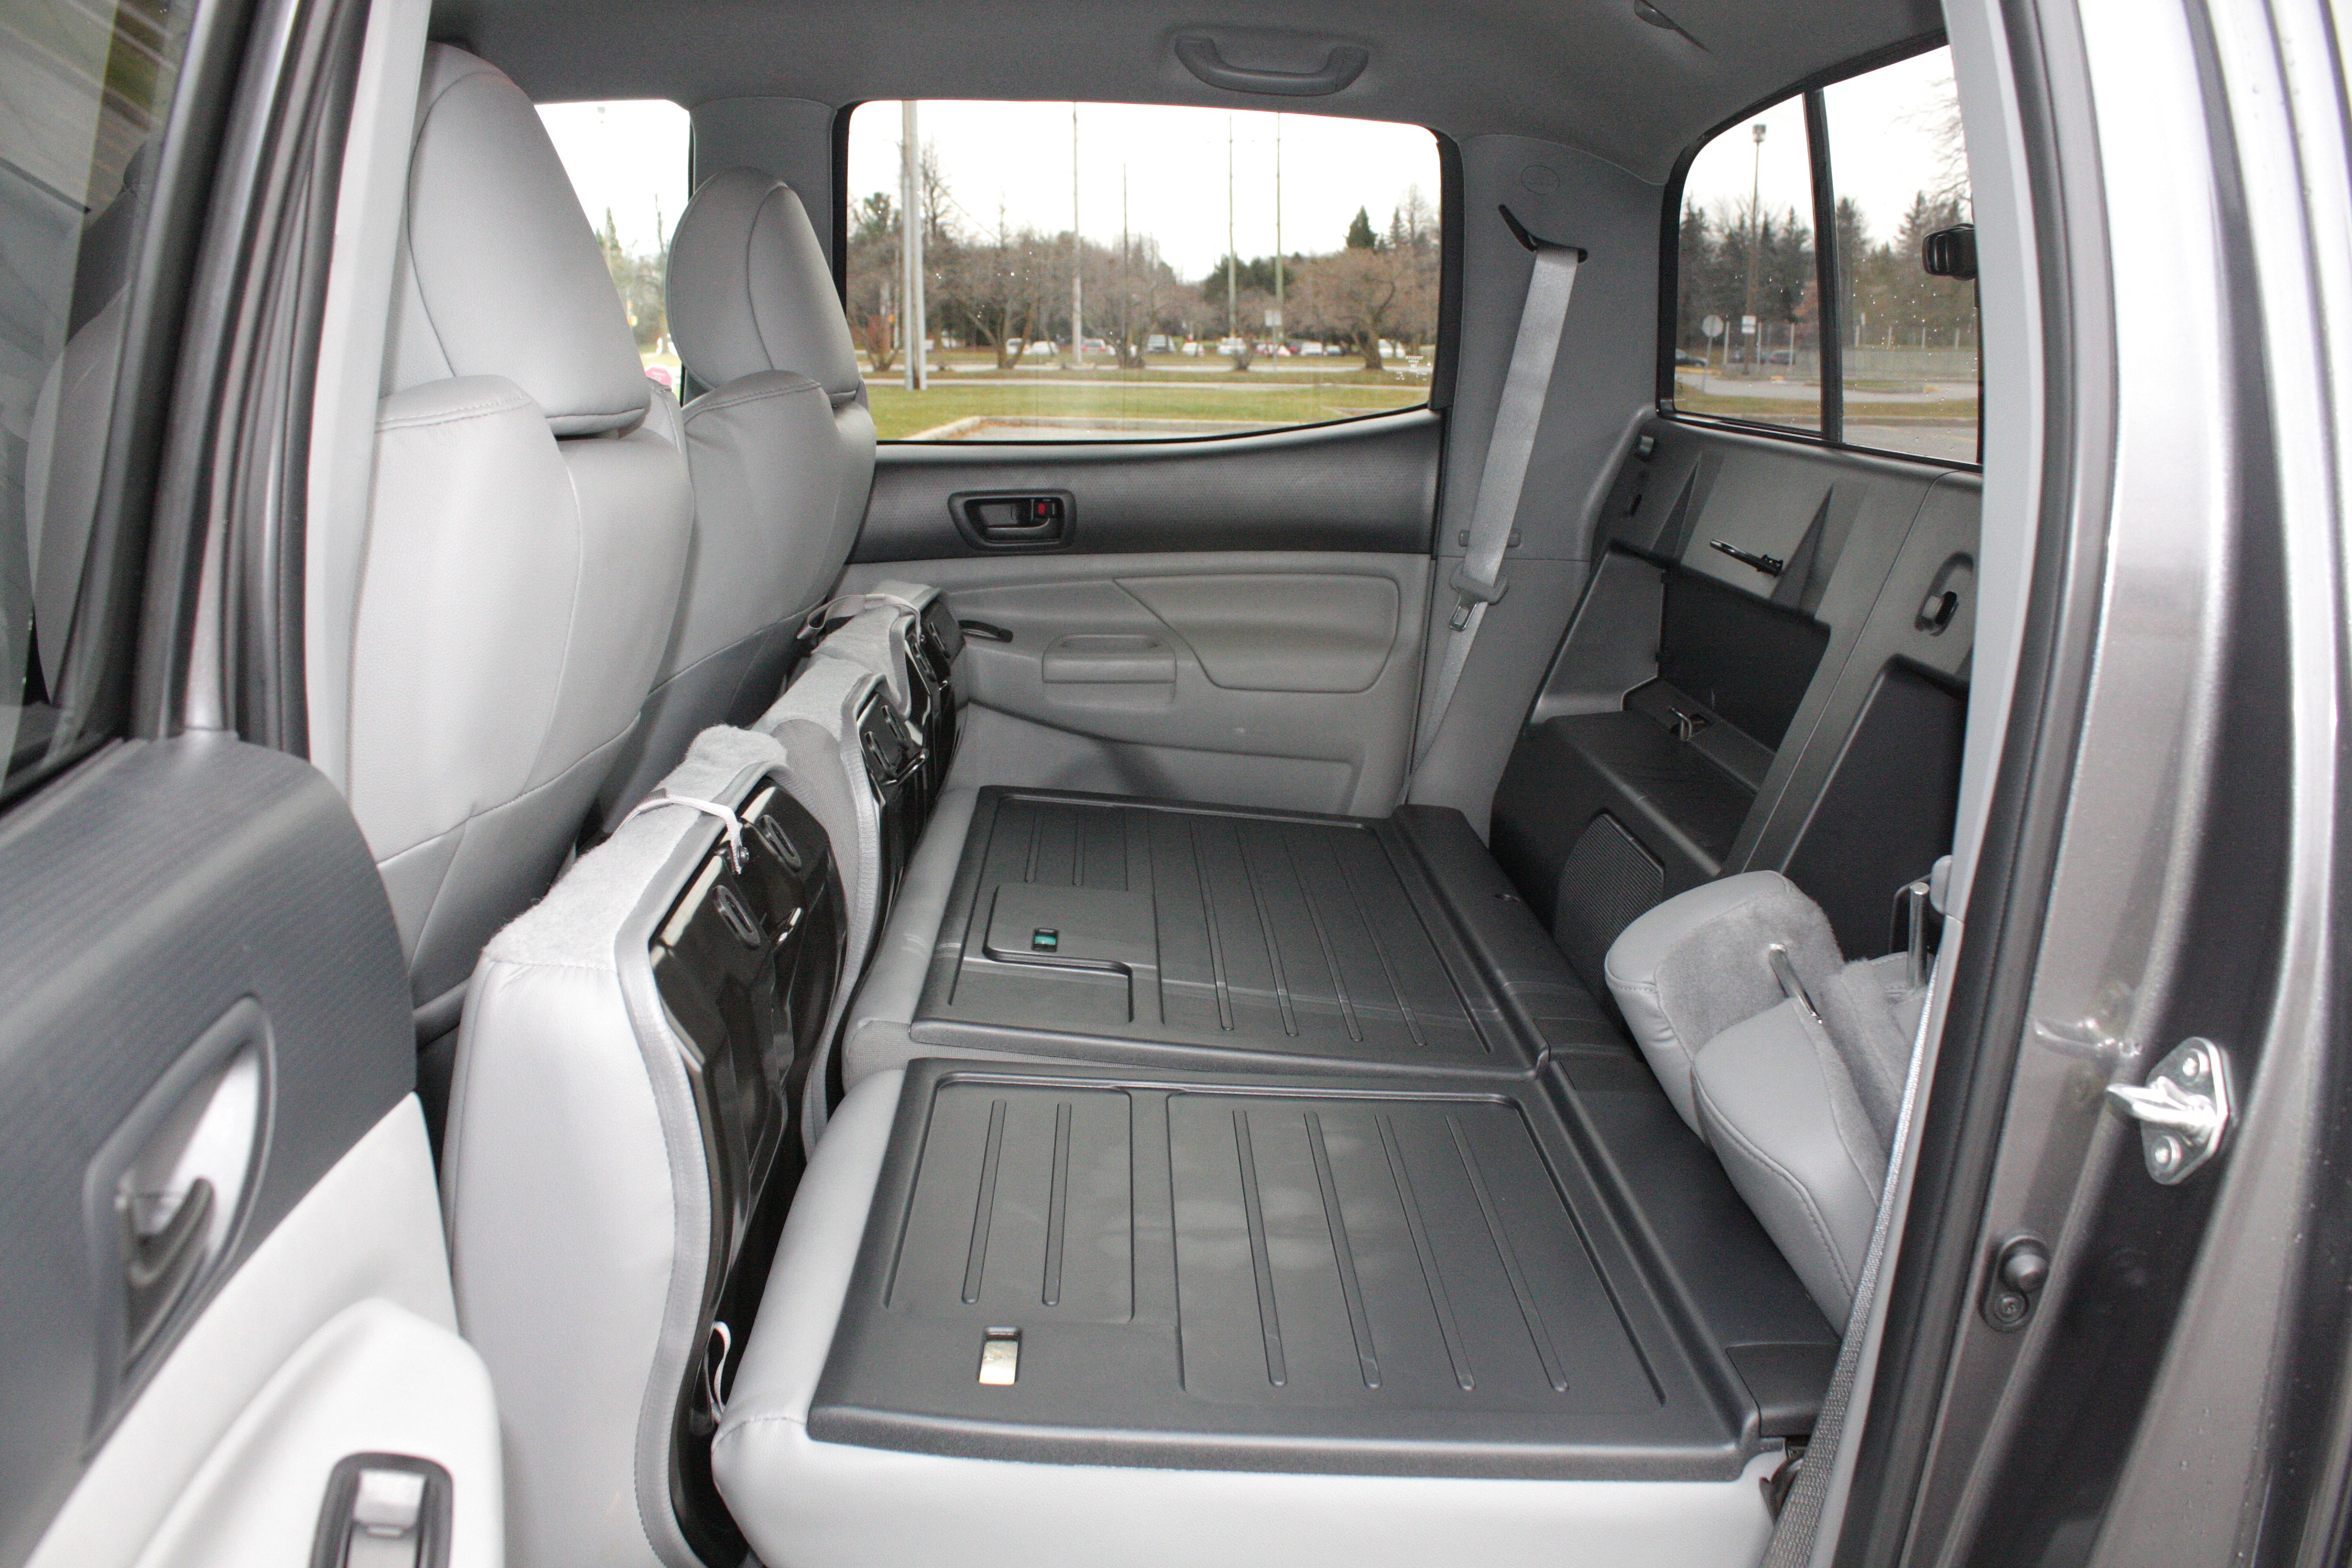 2015 toyota camry back seat fold down